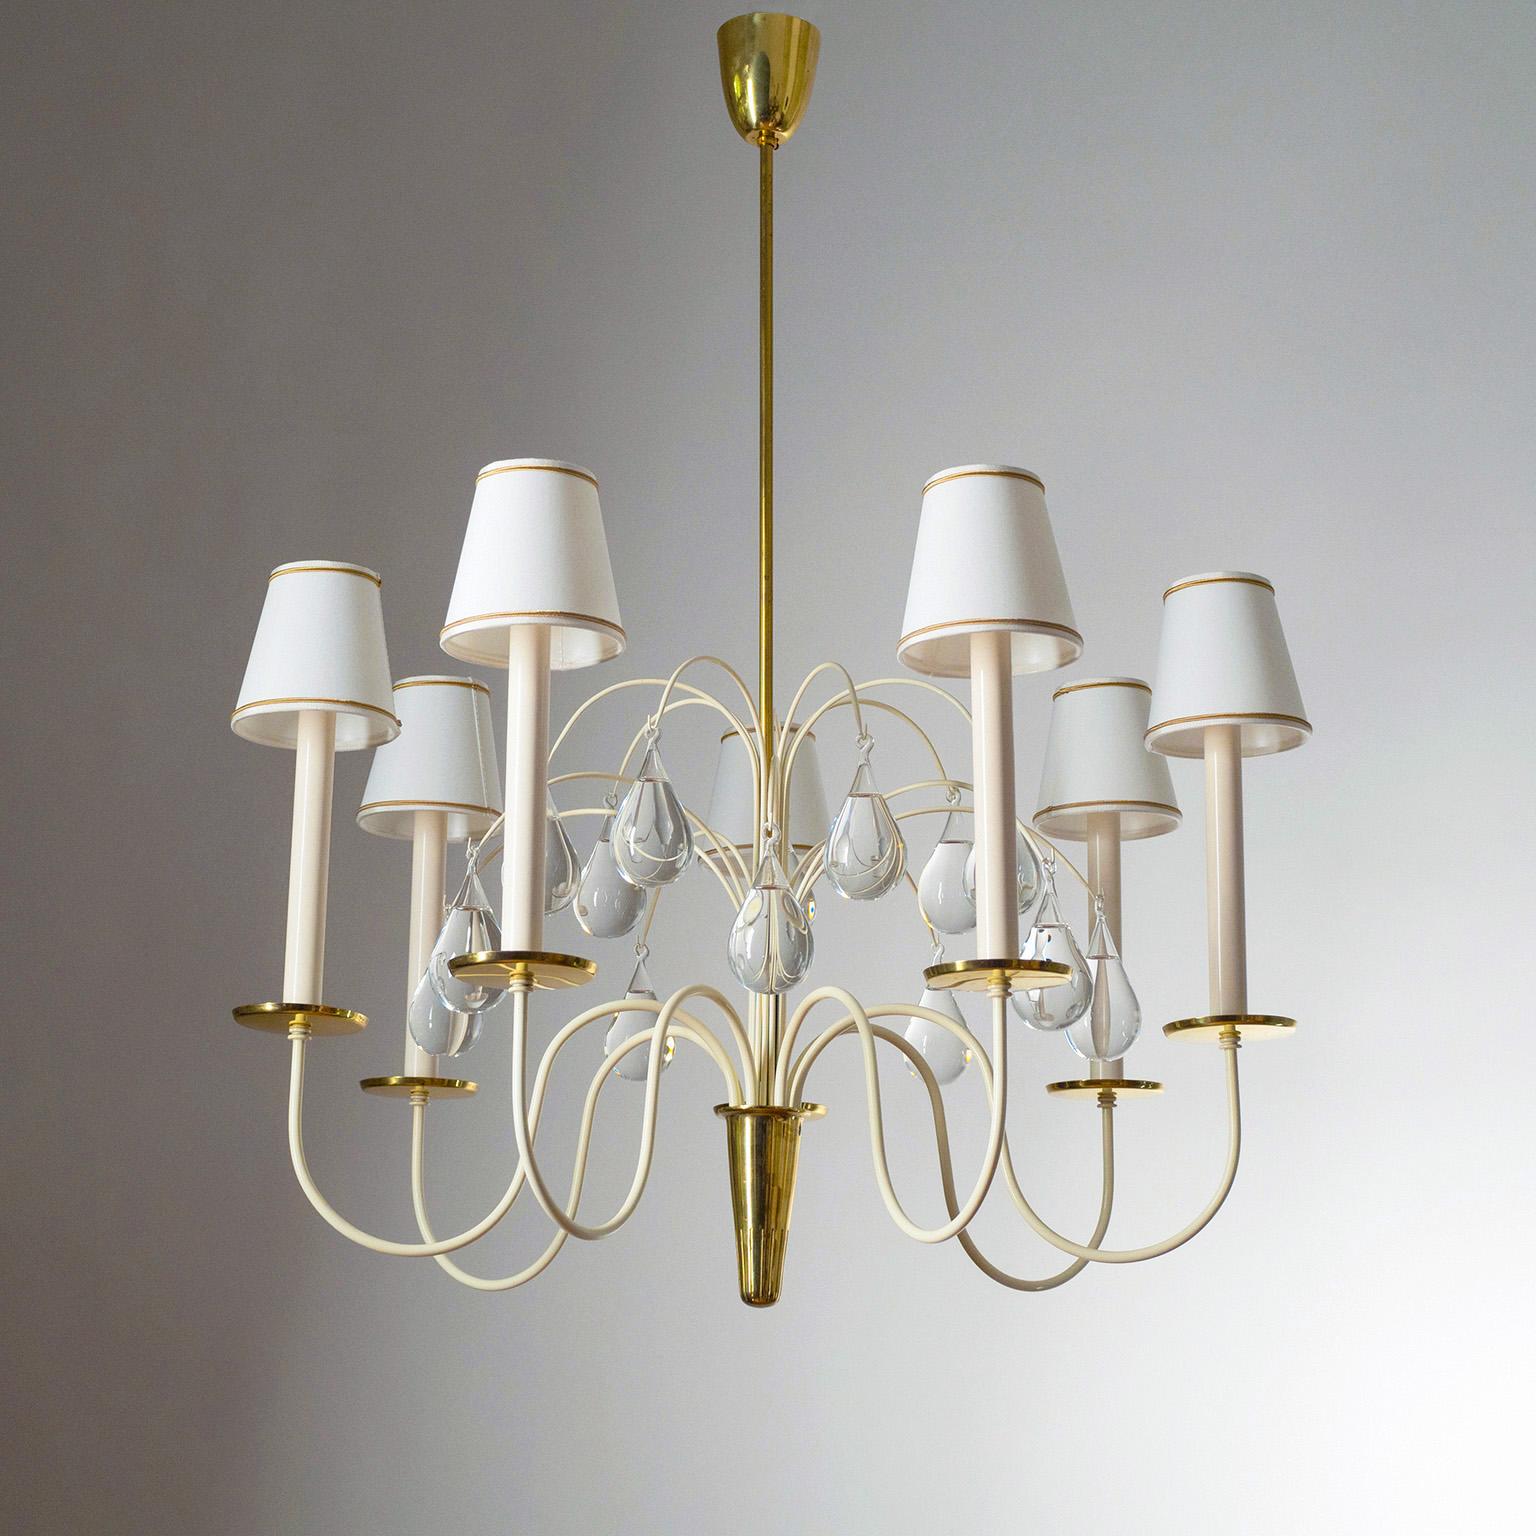 Very fine seven-arm brass chandelier with glass elements by Vereinigte Werkstätten from the 1960s. Delicate brass structure, partially off-white enameled, and unique liquid-filled glass ‘teardrops’. Very good original condition with new custom